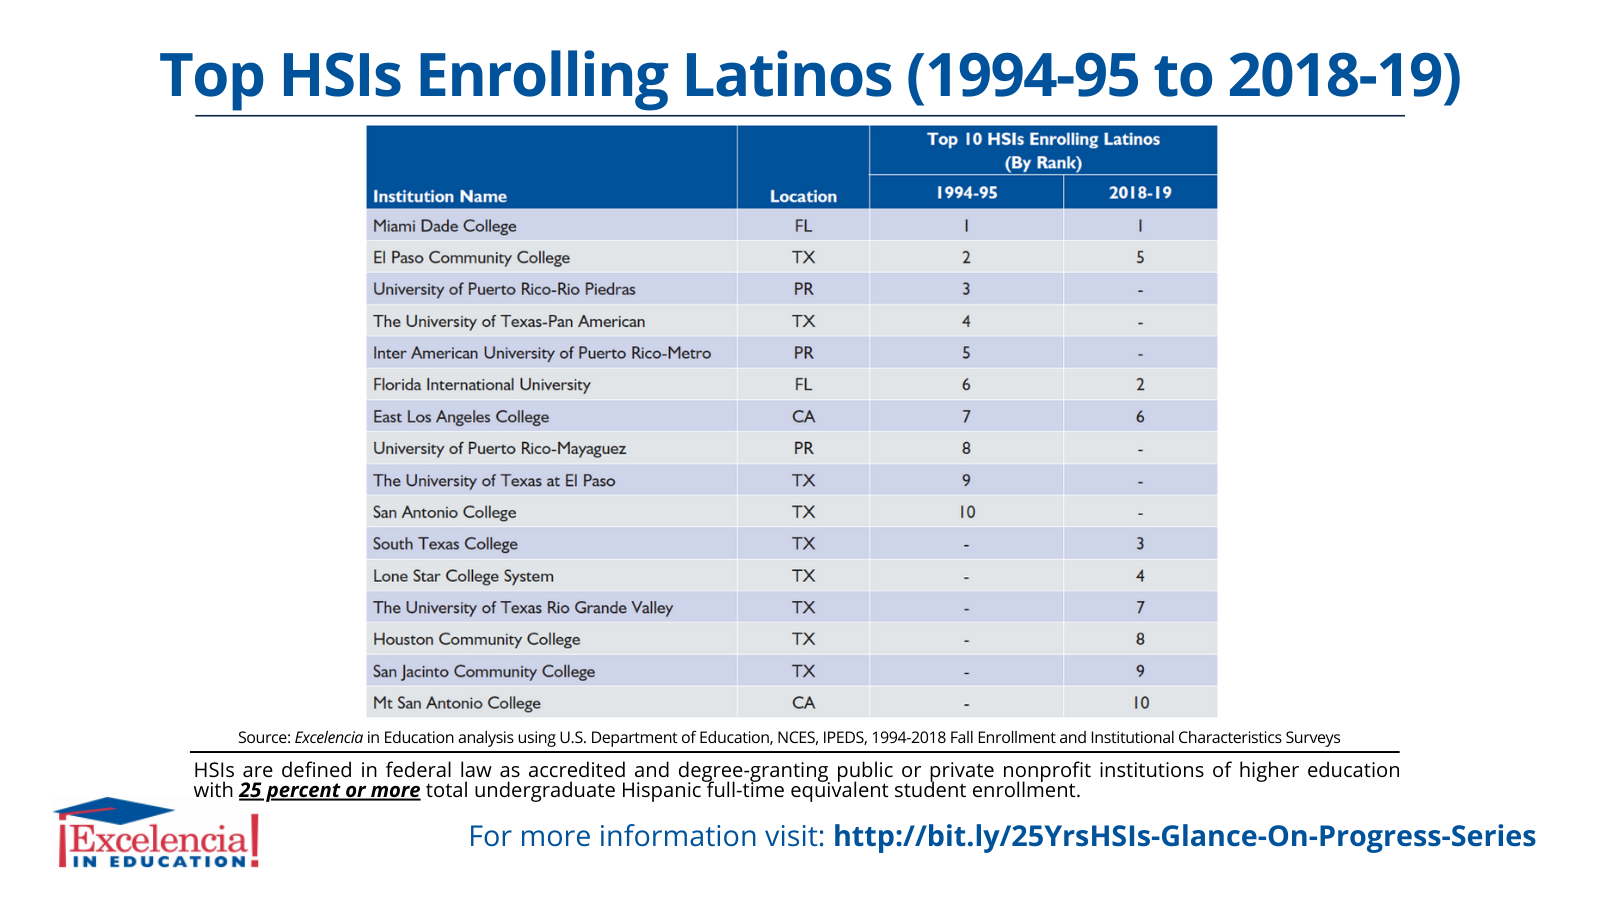 Infographic-25 Yrs HSIs-Top 10 HSIs Enrolling Latinos 1994-95 to 2018-19